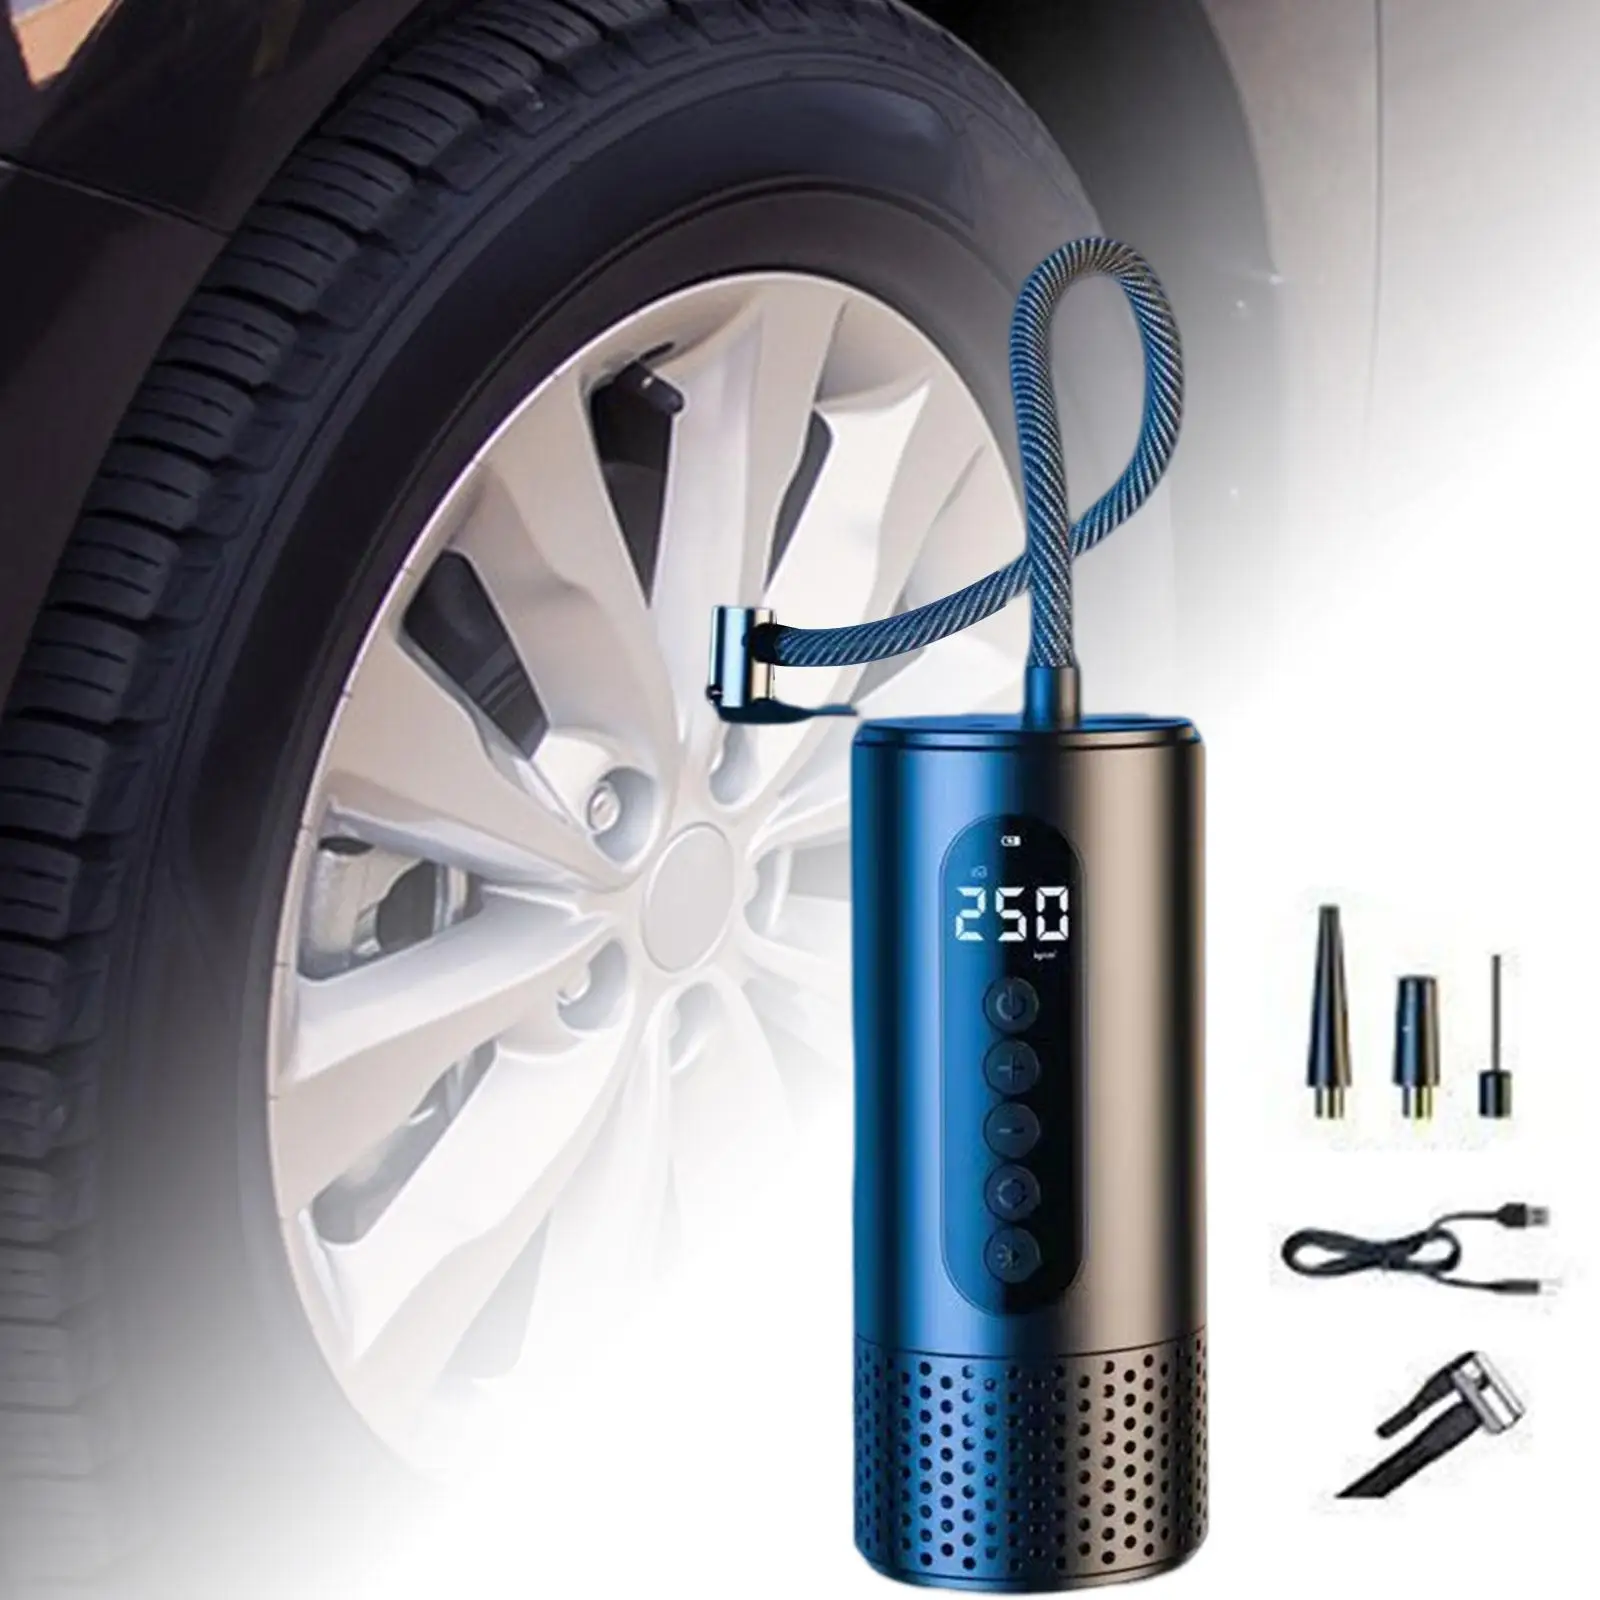 Tyre Inflator Air Compressor with LED Light LCD Display Easy Operation Low Noise Air Pump for Electric Motorcycle Ball Car